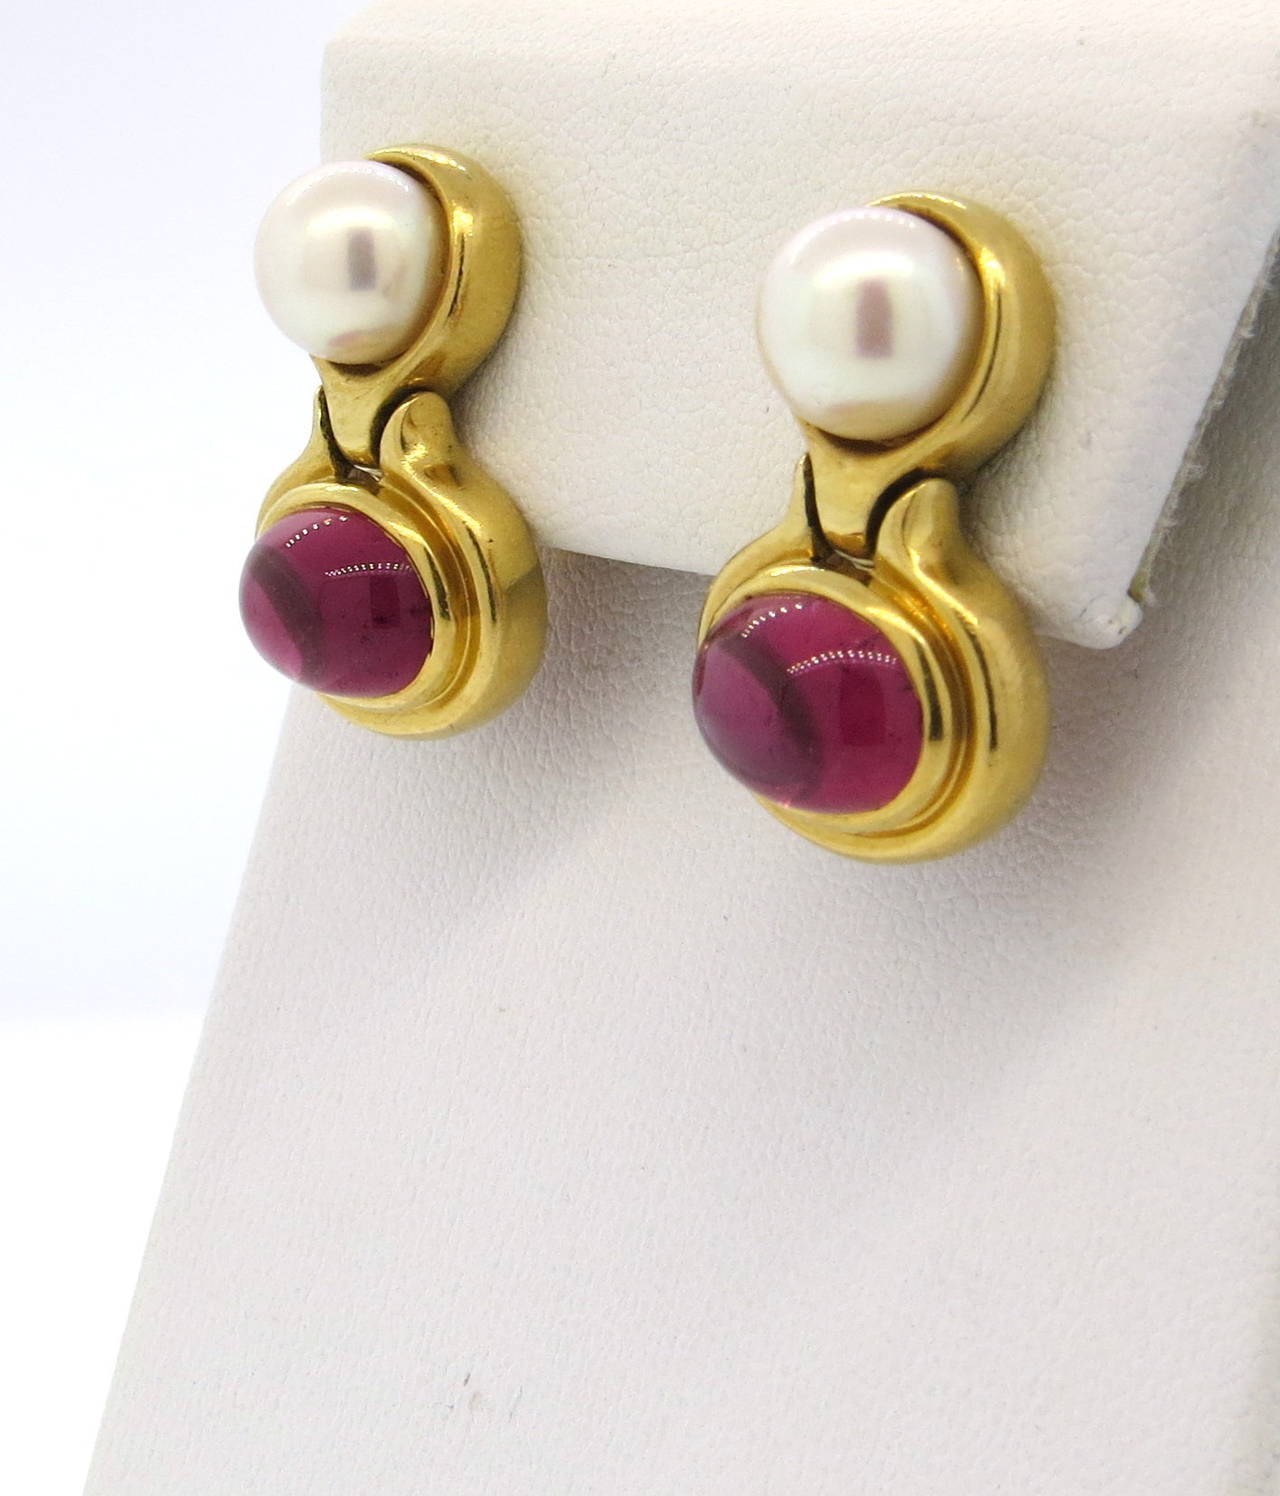 A pair of 18k yellow gold earrings set with pink tourmaline cabochons 10.4mm x 8mm and saltwater cultured pearls 8.5mm in diameter.  Crafted by Bulgari, the earrings measure 25mm x 16mm and weigh 21 grams.  Marked Bulgari, 750, Italian Assay Marks.